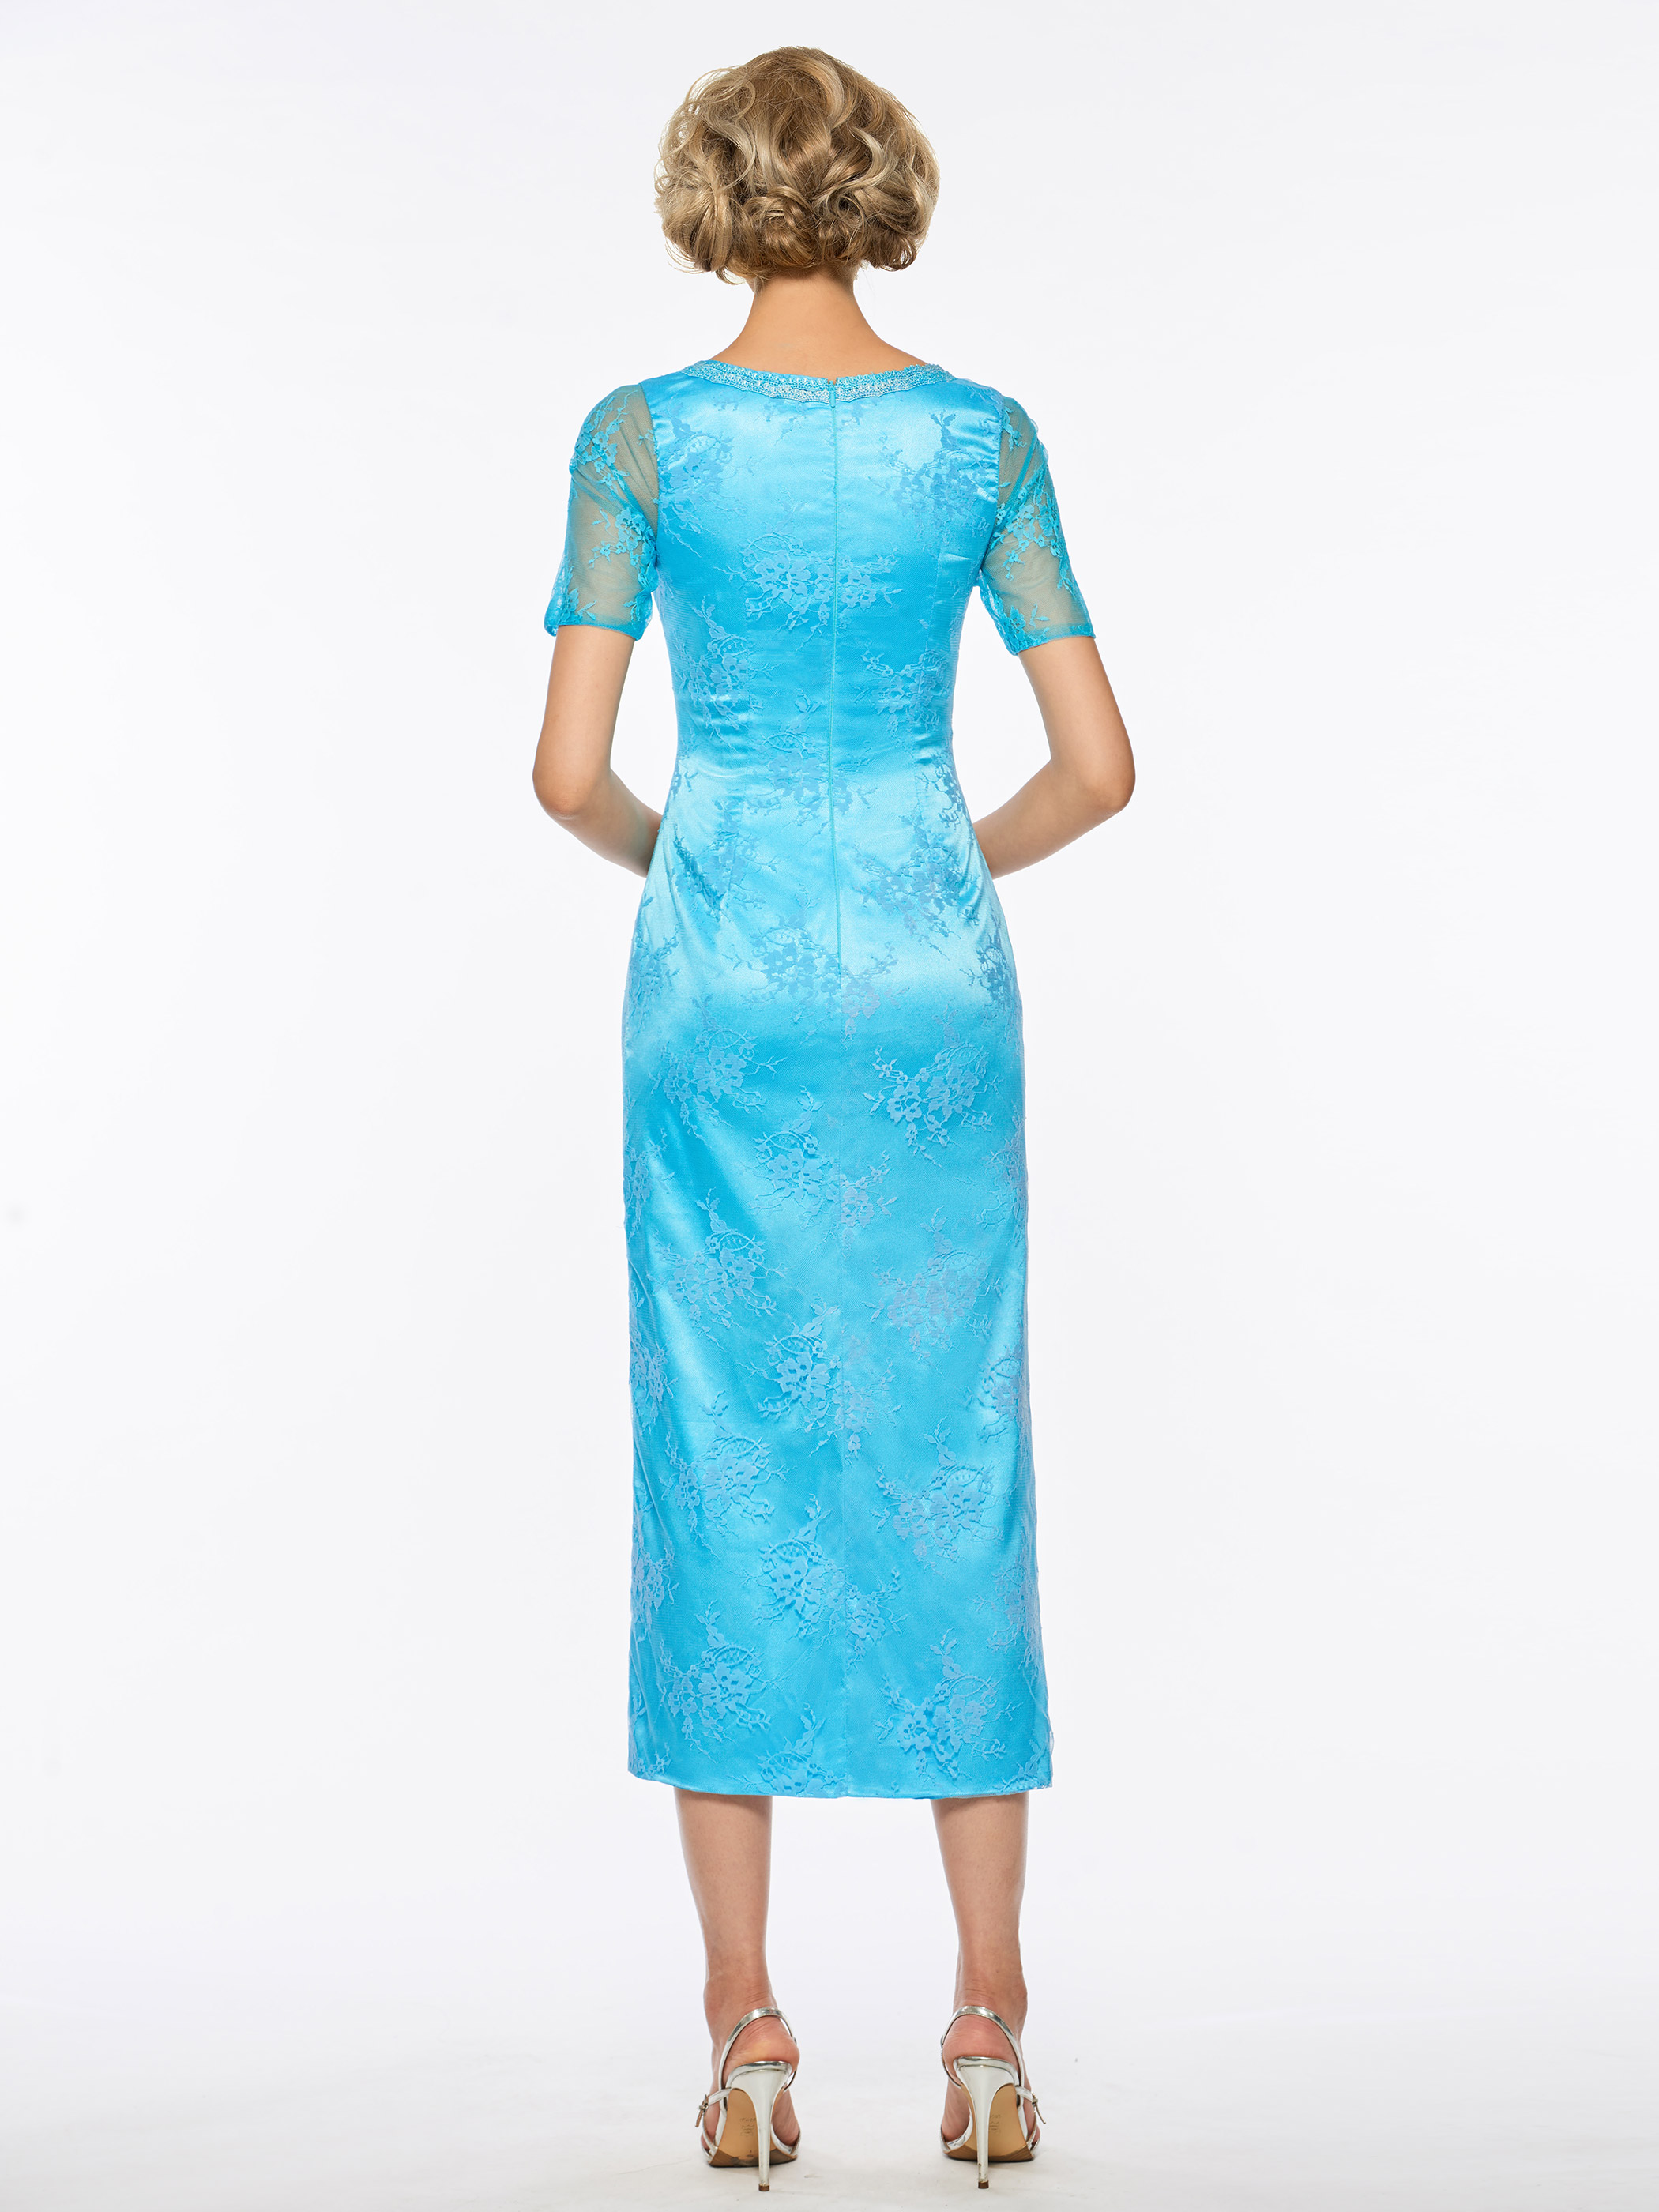 Lace Tea Length Mother of the Bride Dress with Jacket